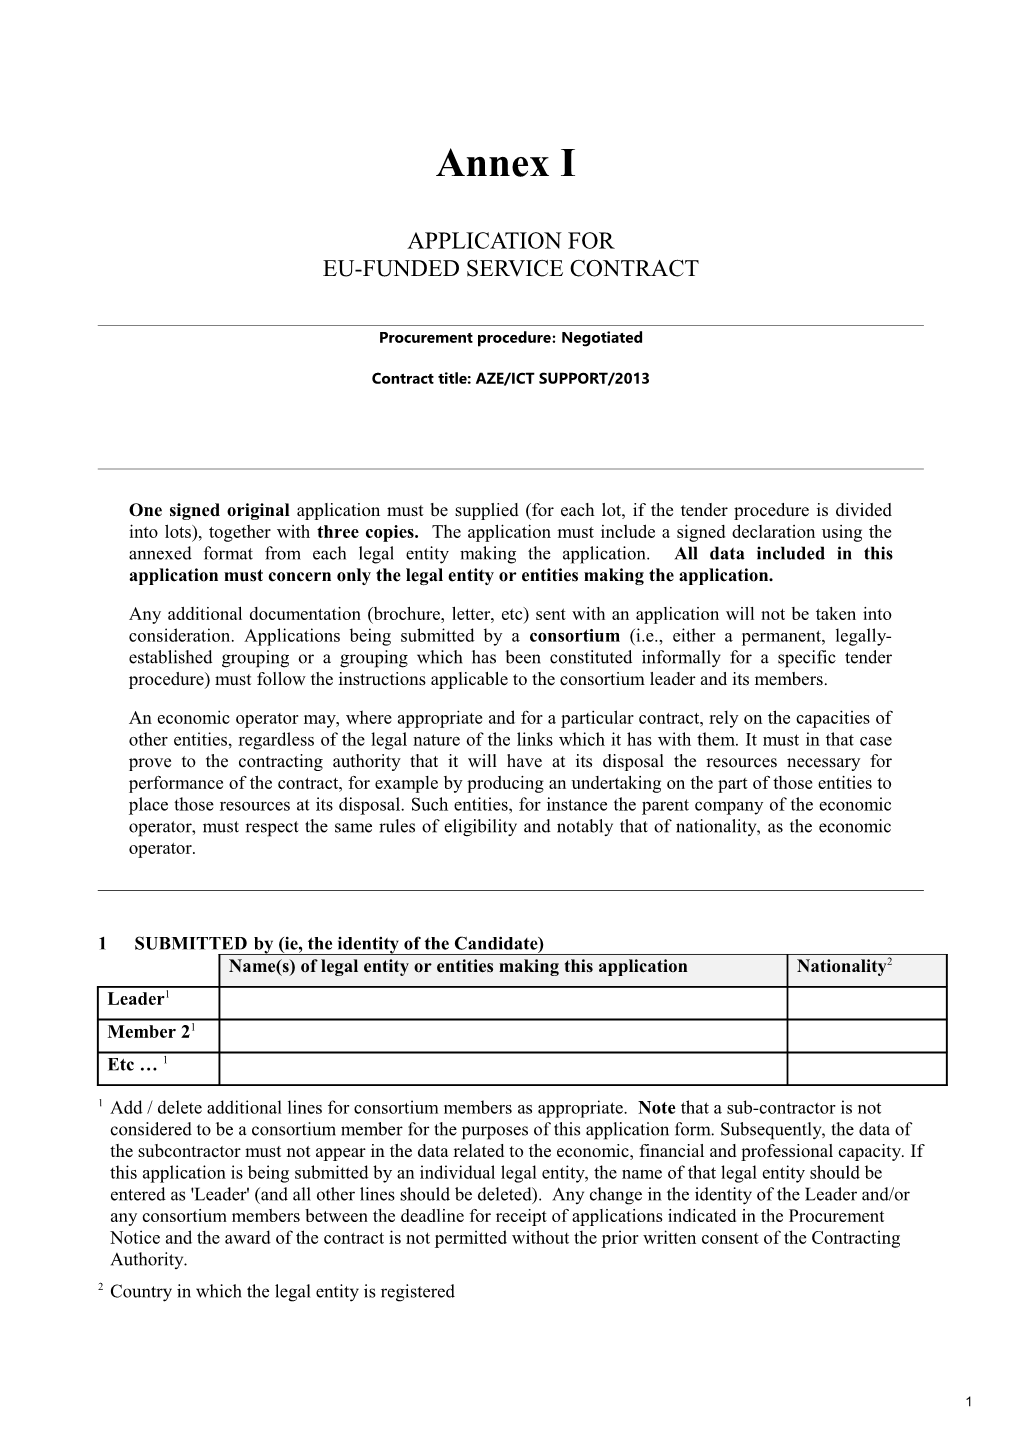 Application for Eu-Funded Service Contract